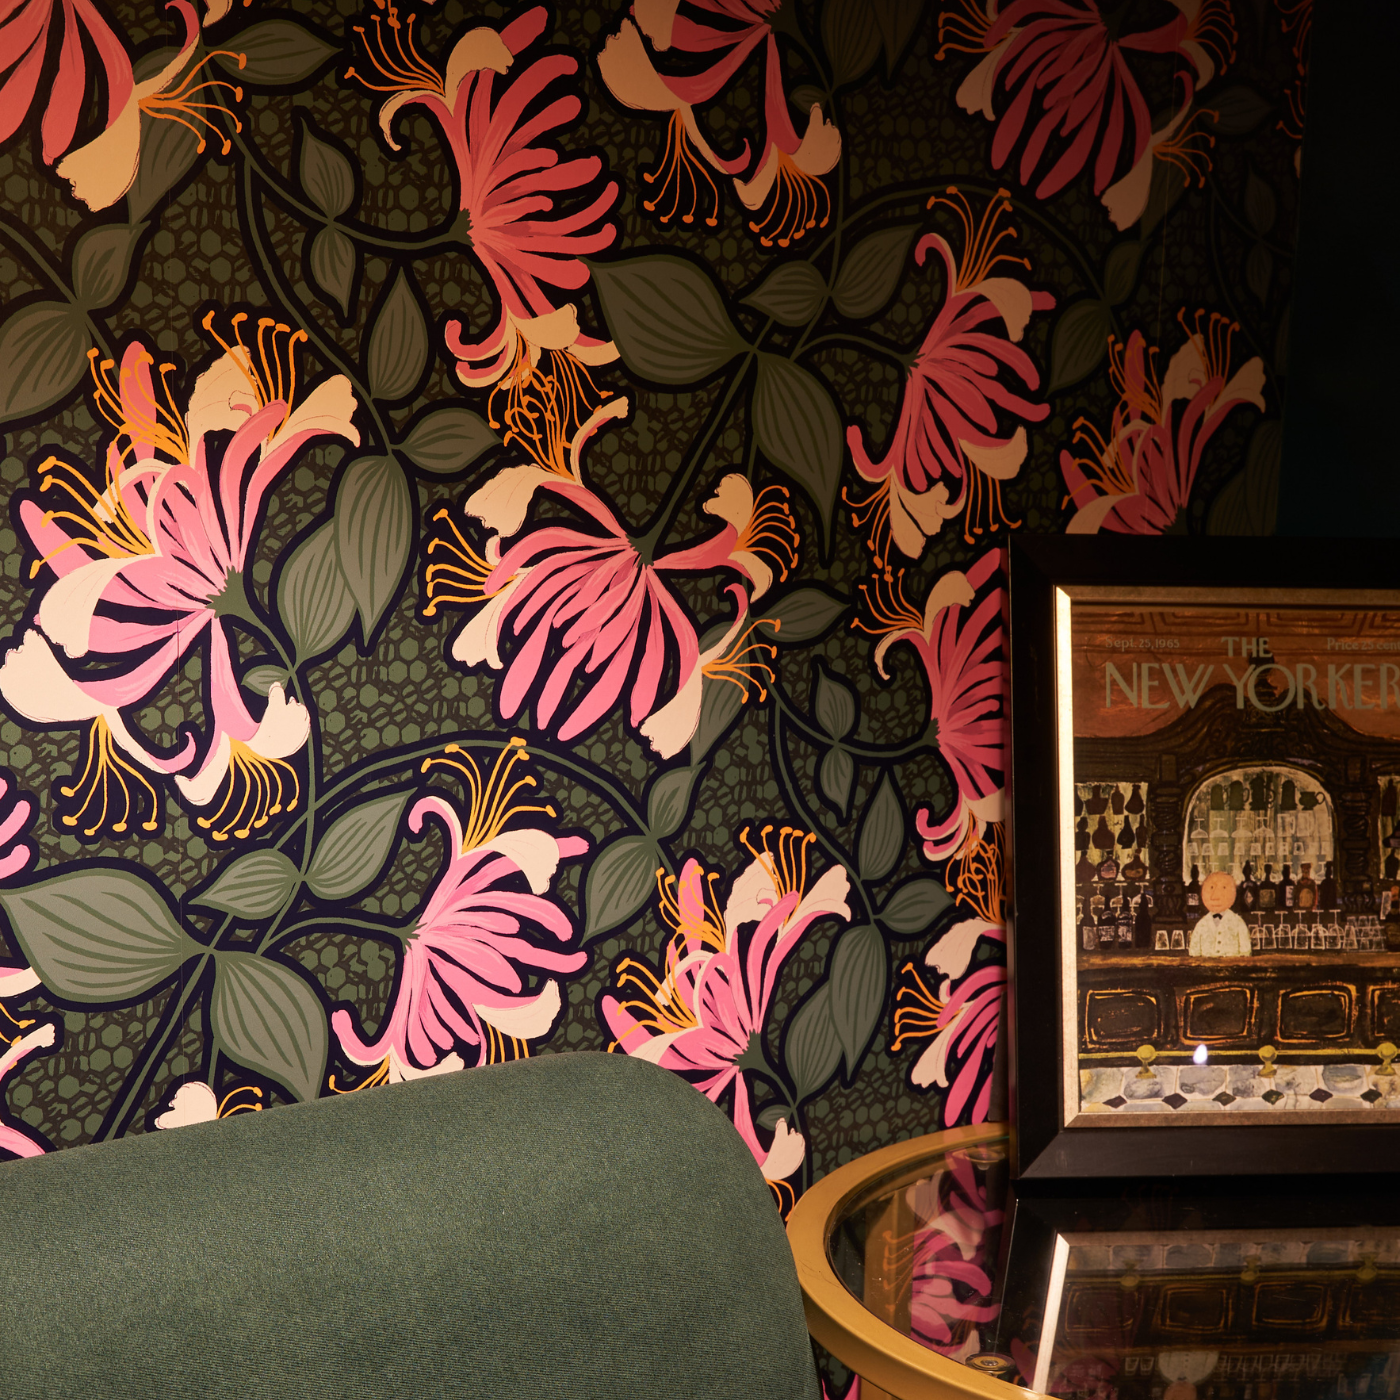 The corner of a dark green sofa in a small room with a small wooden table beside it. The wallpaper behind the sofa has a black background and hot pink flowers extending in all directions each with a grouping of small green leaves.